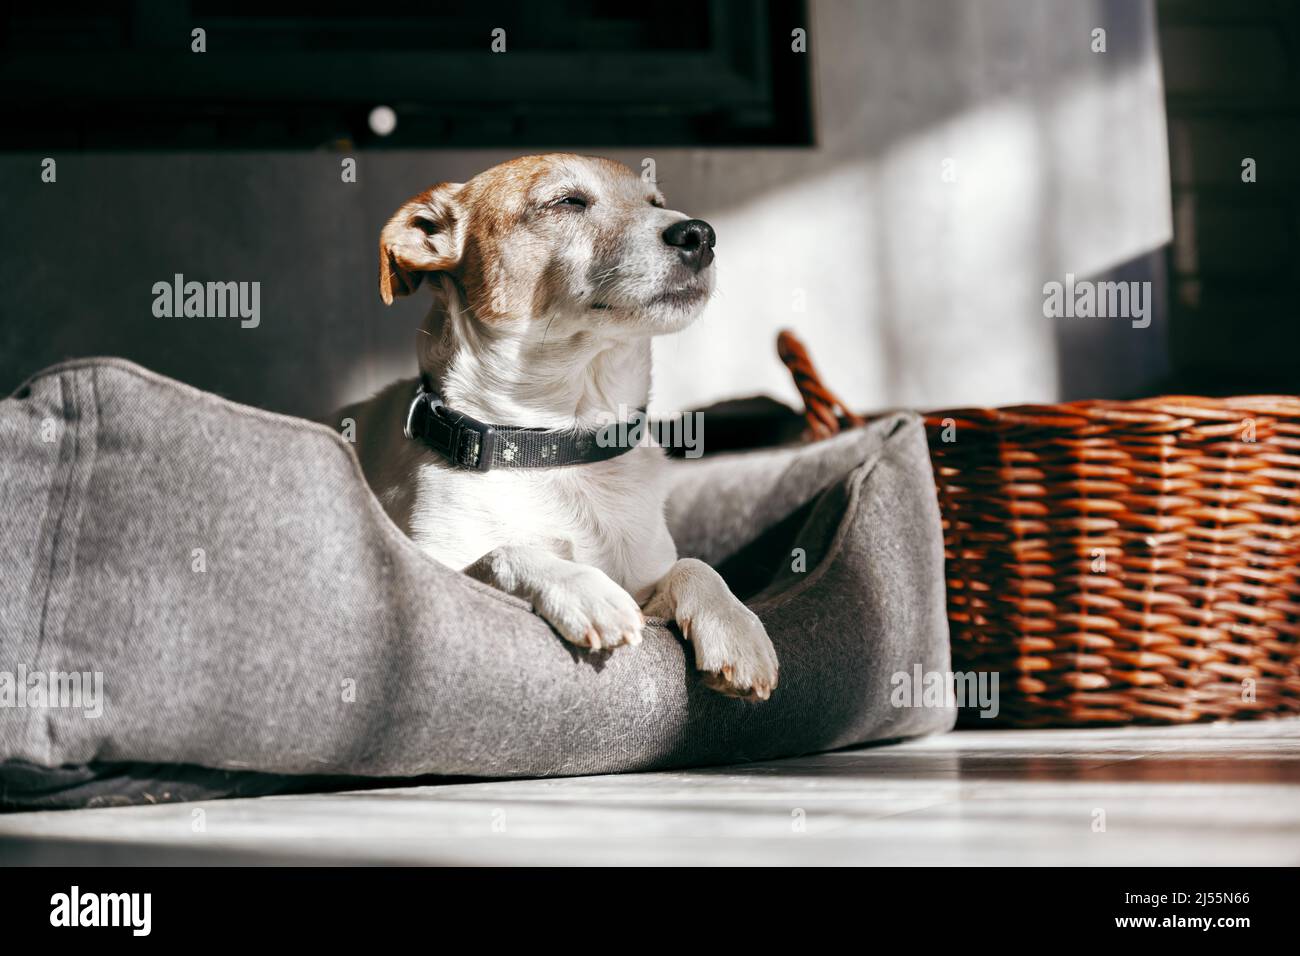 Purebred male Jack Russell Terrier lies in his bed and rests. Animal photography Stock Photo